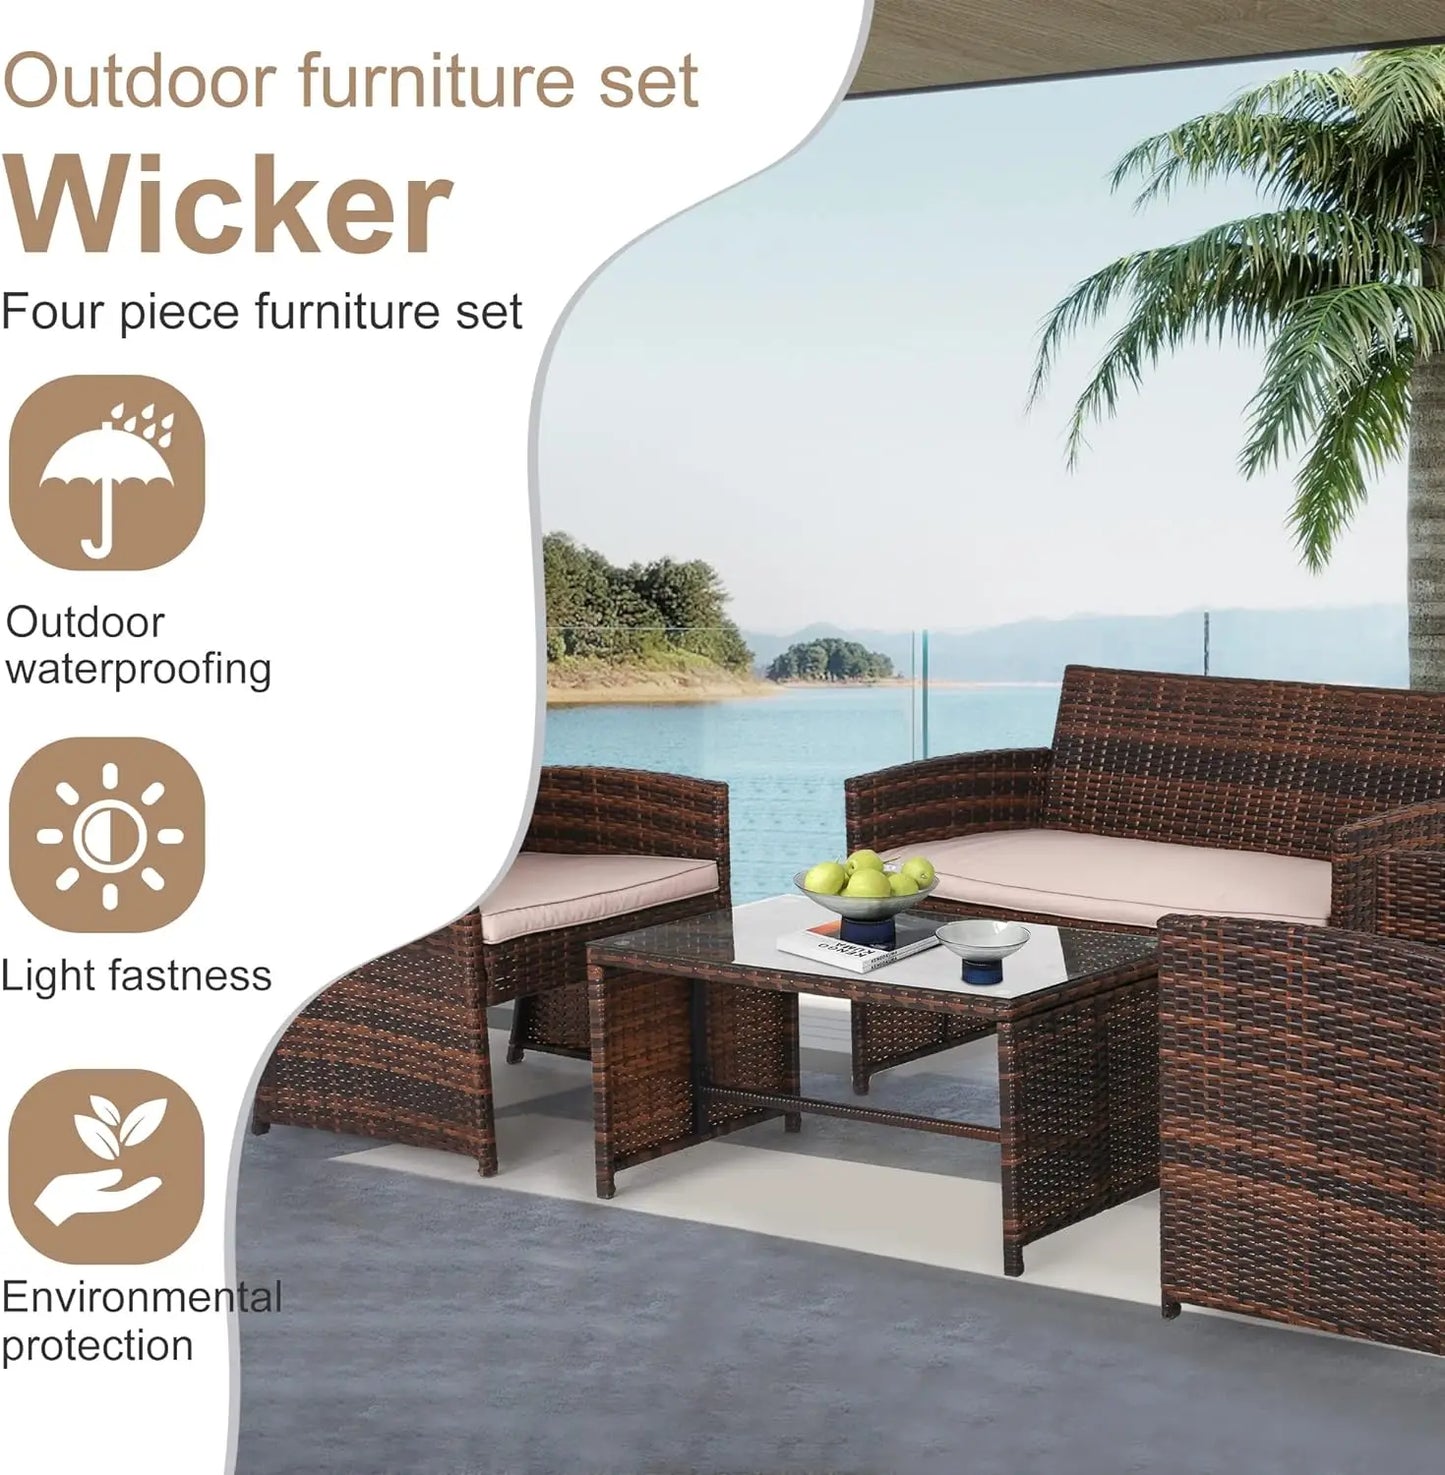 4 Pieces, Outdoor Patio Furniture with wicker chairs and table. - My Store